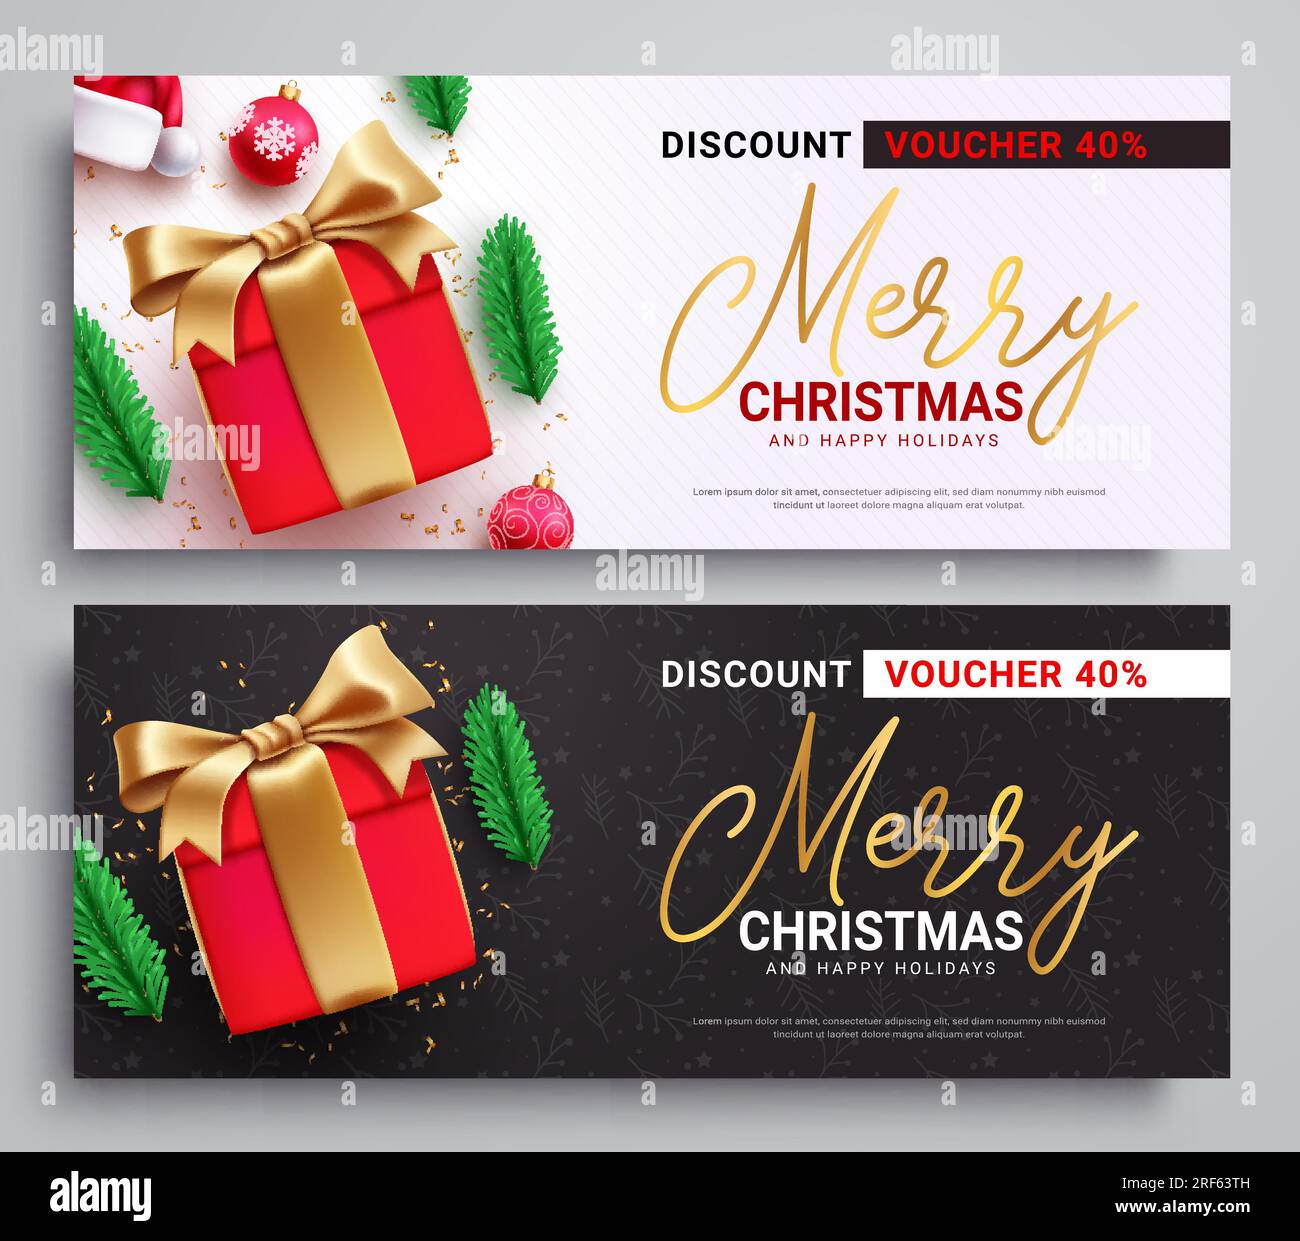 Christmas voucher sale set vector design. Merry christmas greeting text in gift certificate vouchers discount for holiday season shopping. Vector Stock Vector